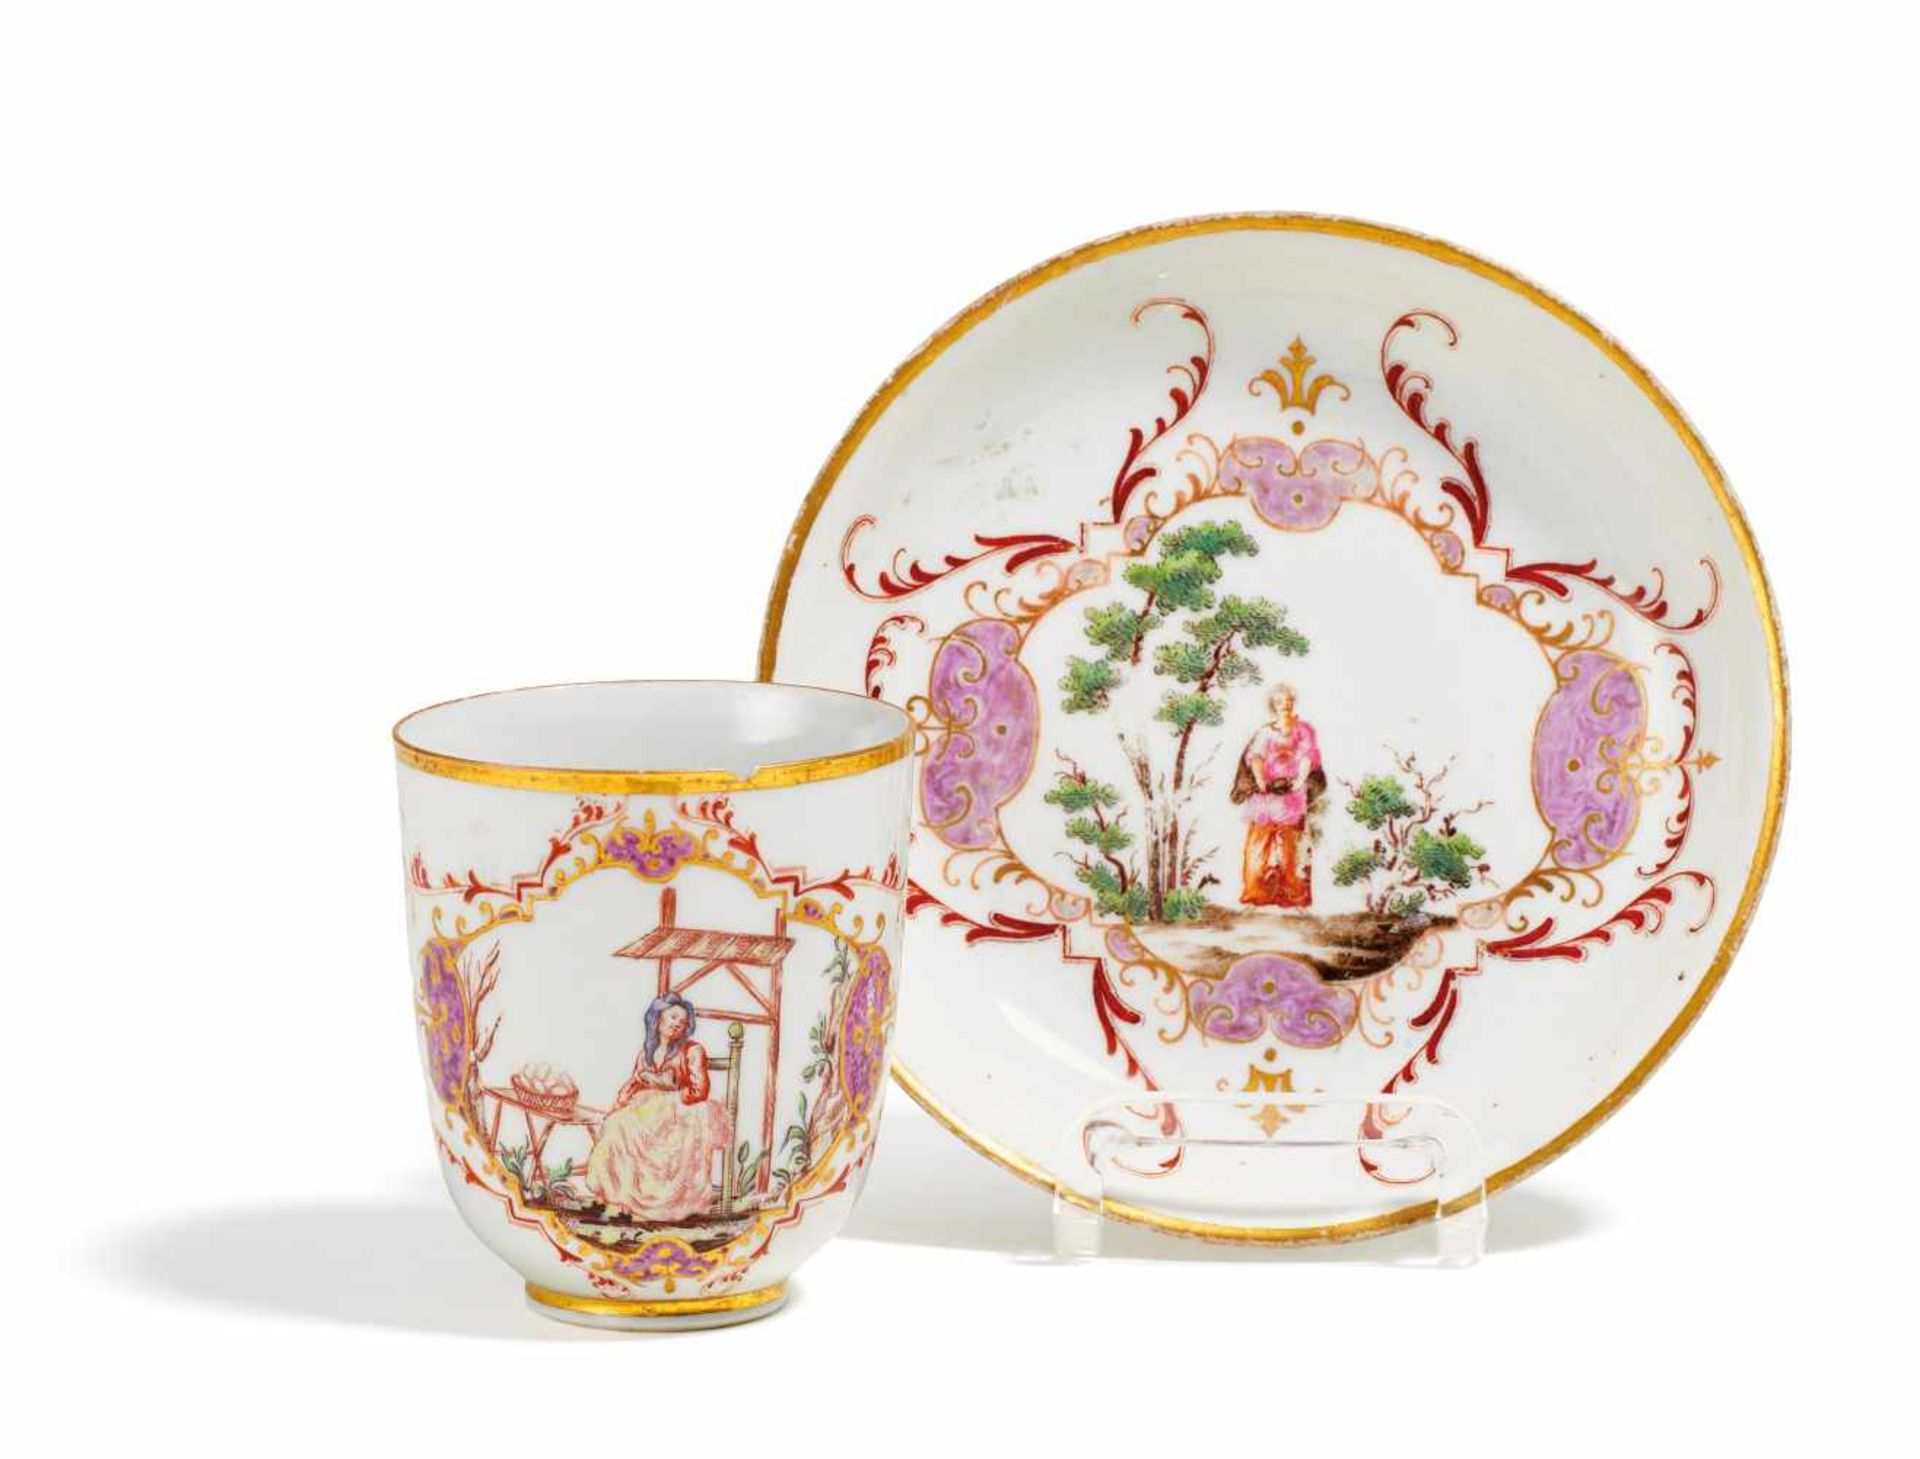 PORCELAIN CUP AND SAUCER WITH HAUSMALEREI.